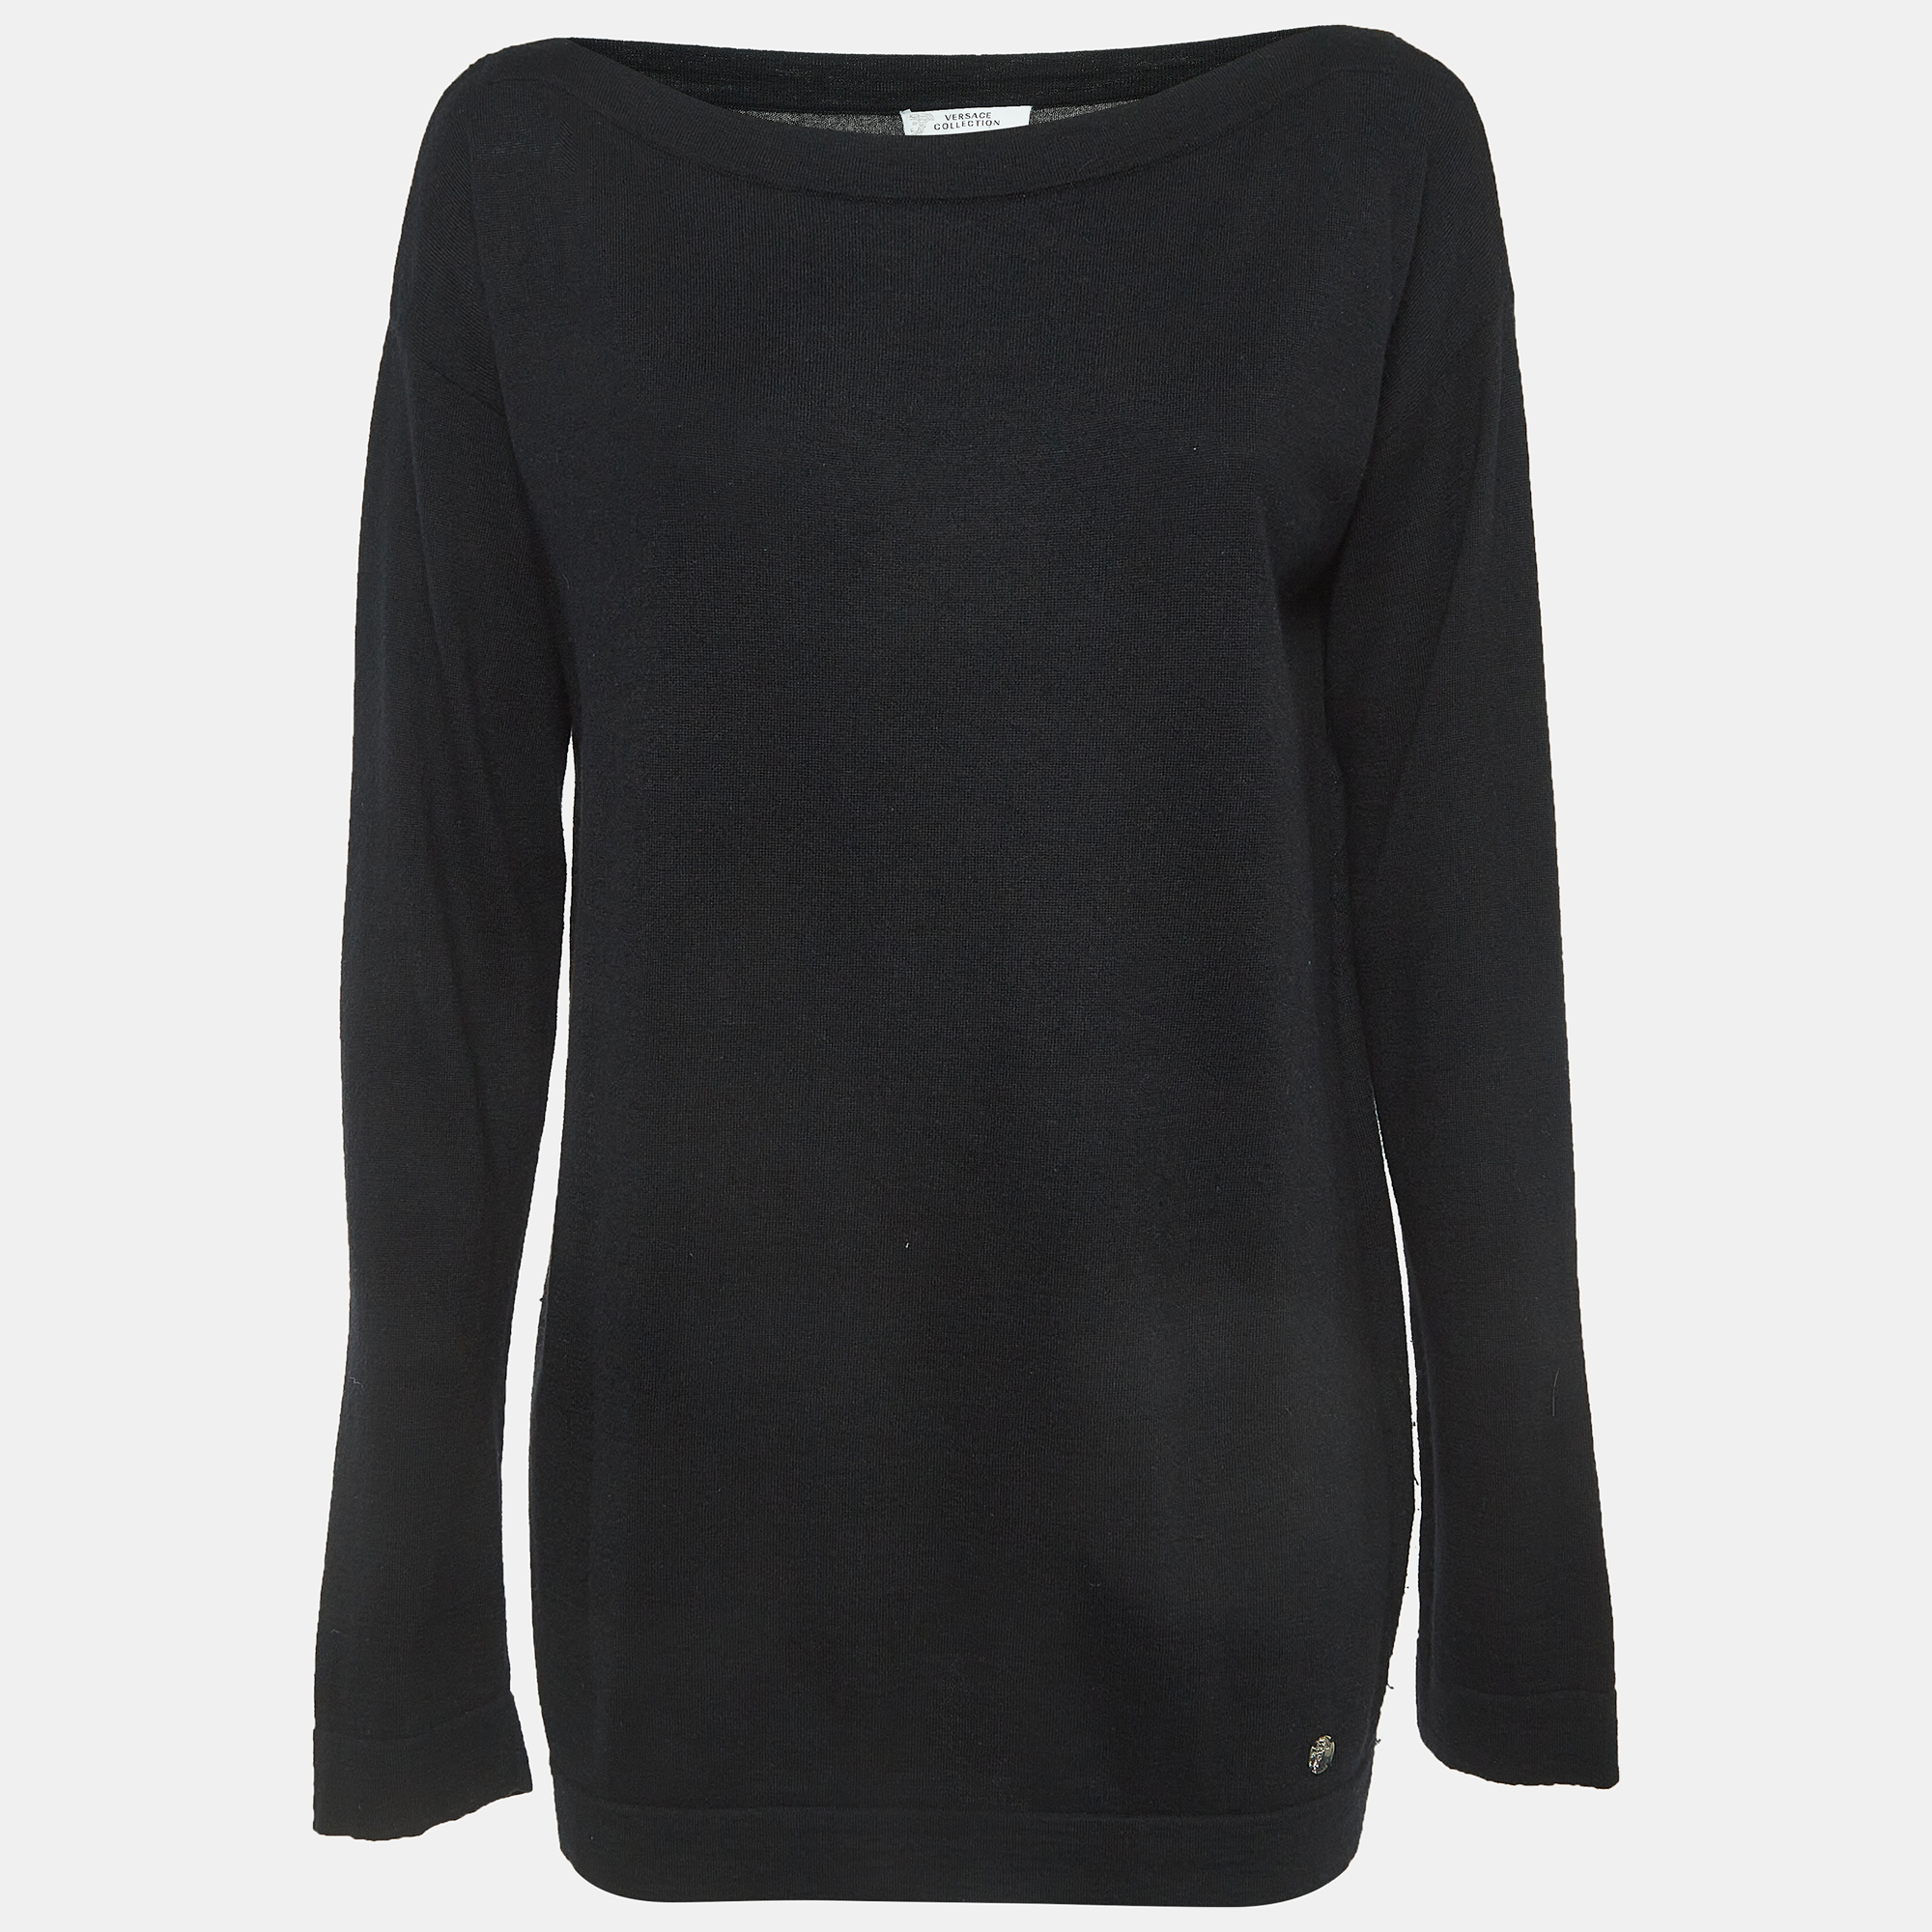 Versace collection black silk & cashmere long sleeve top m